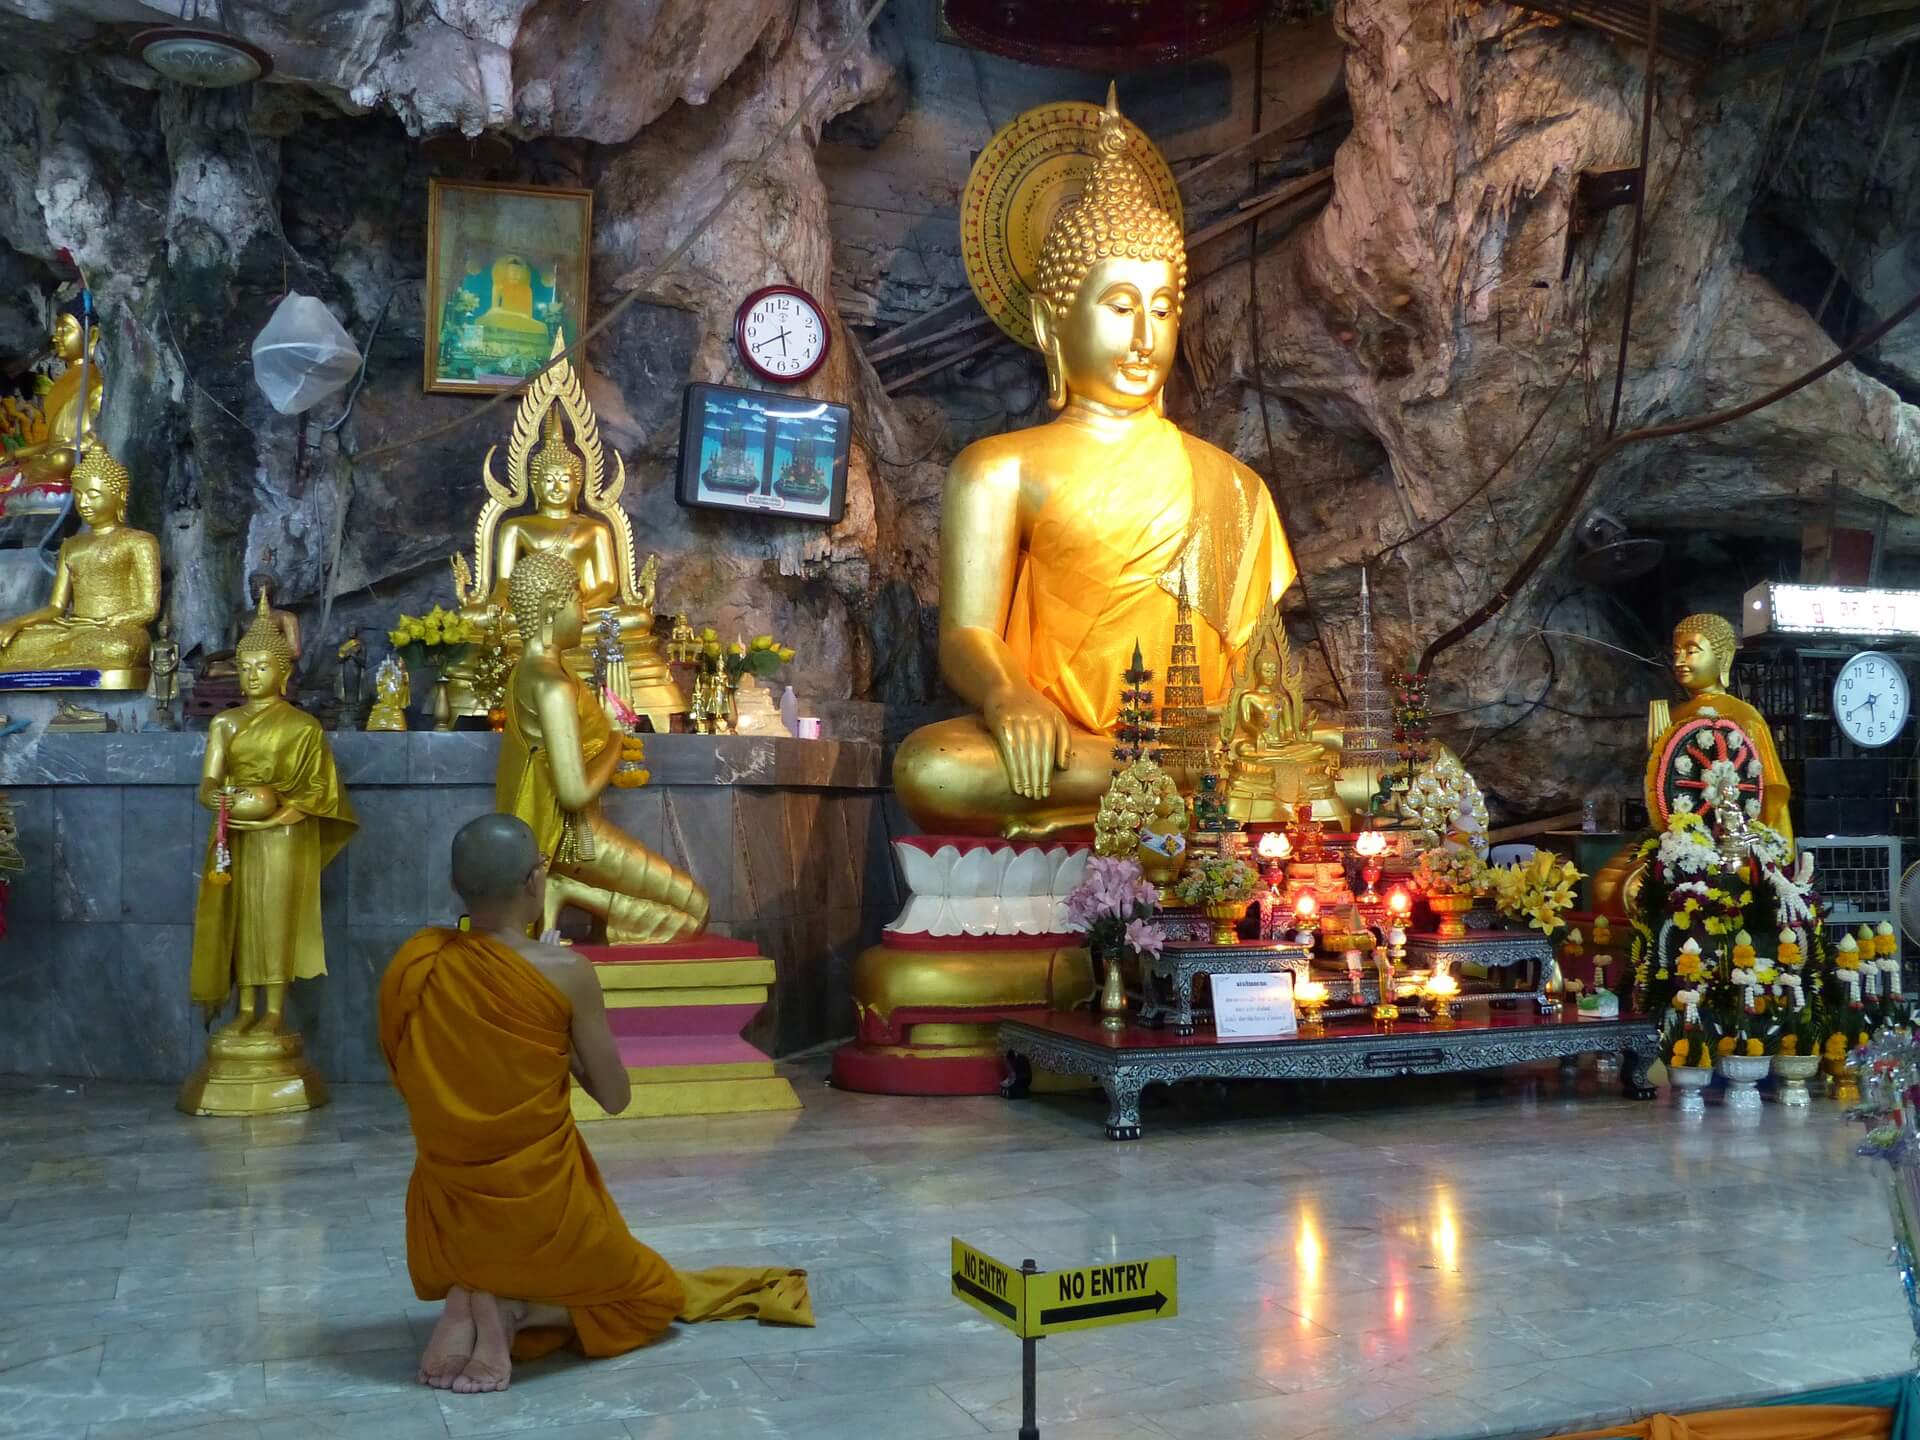 Monk praying inside the Tiger Cave temple in Krabi